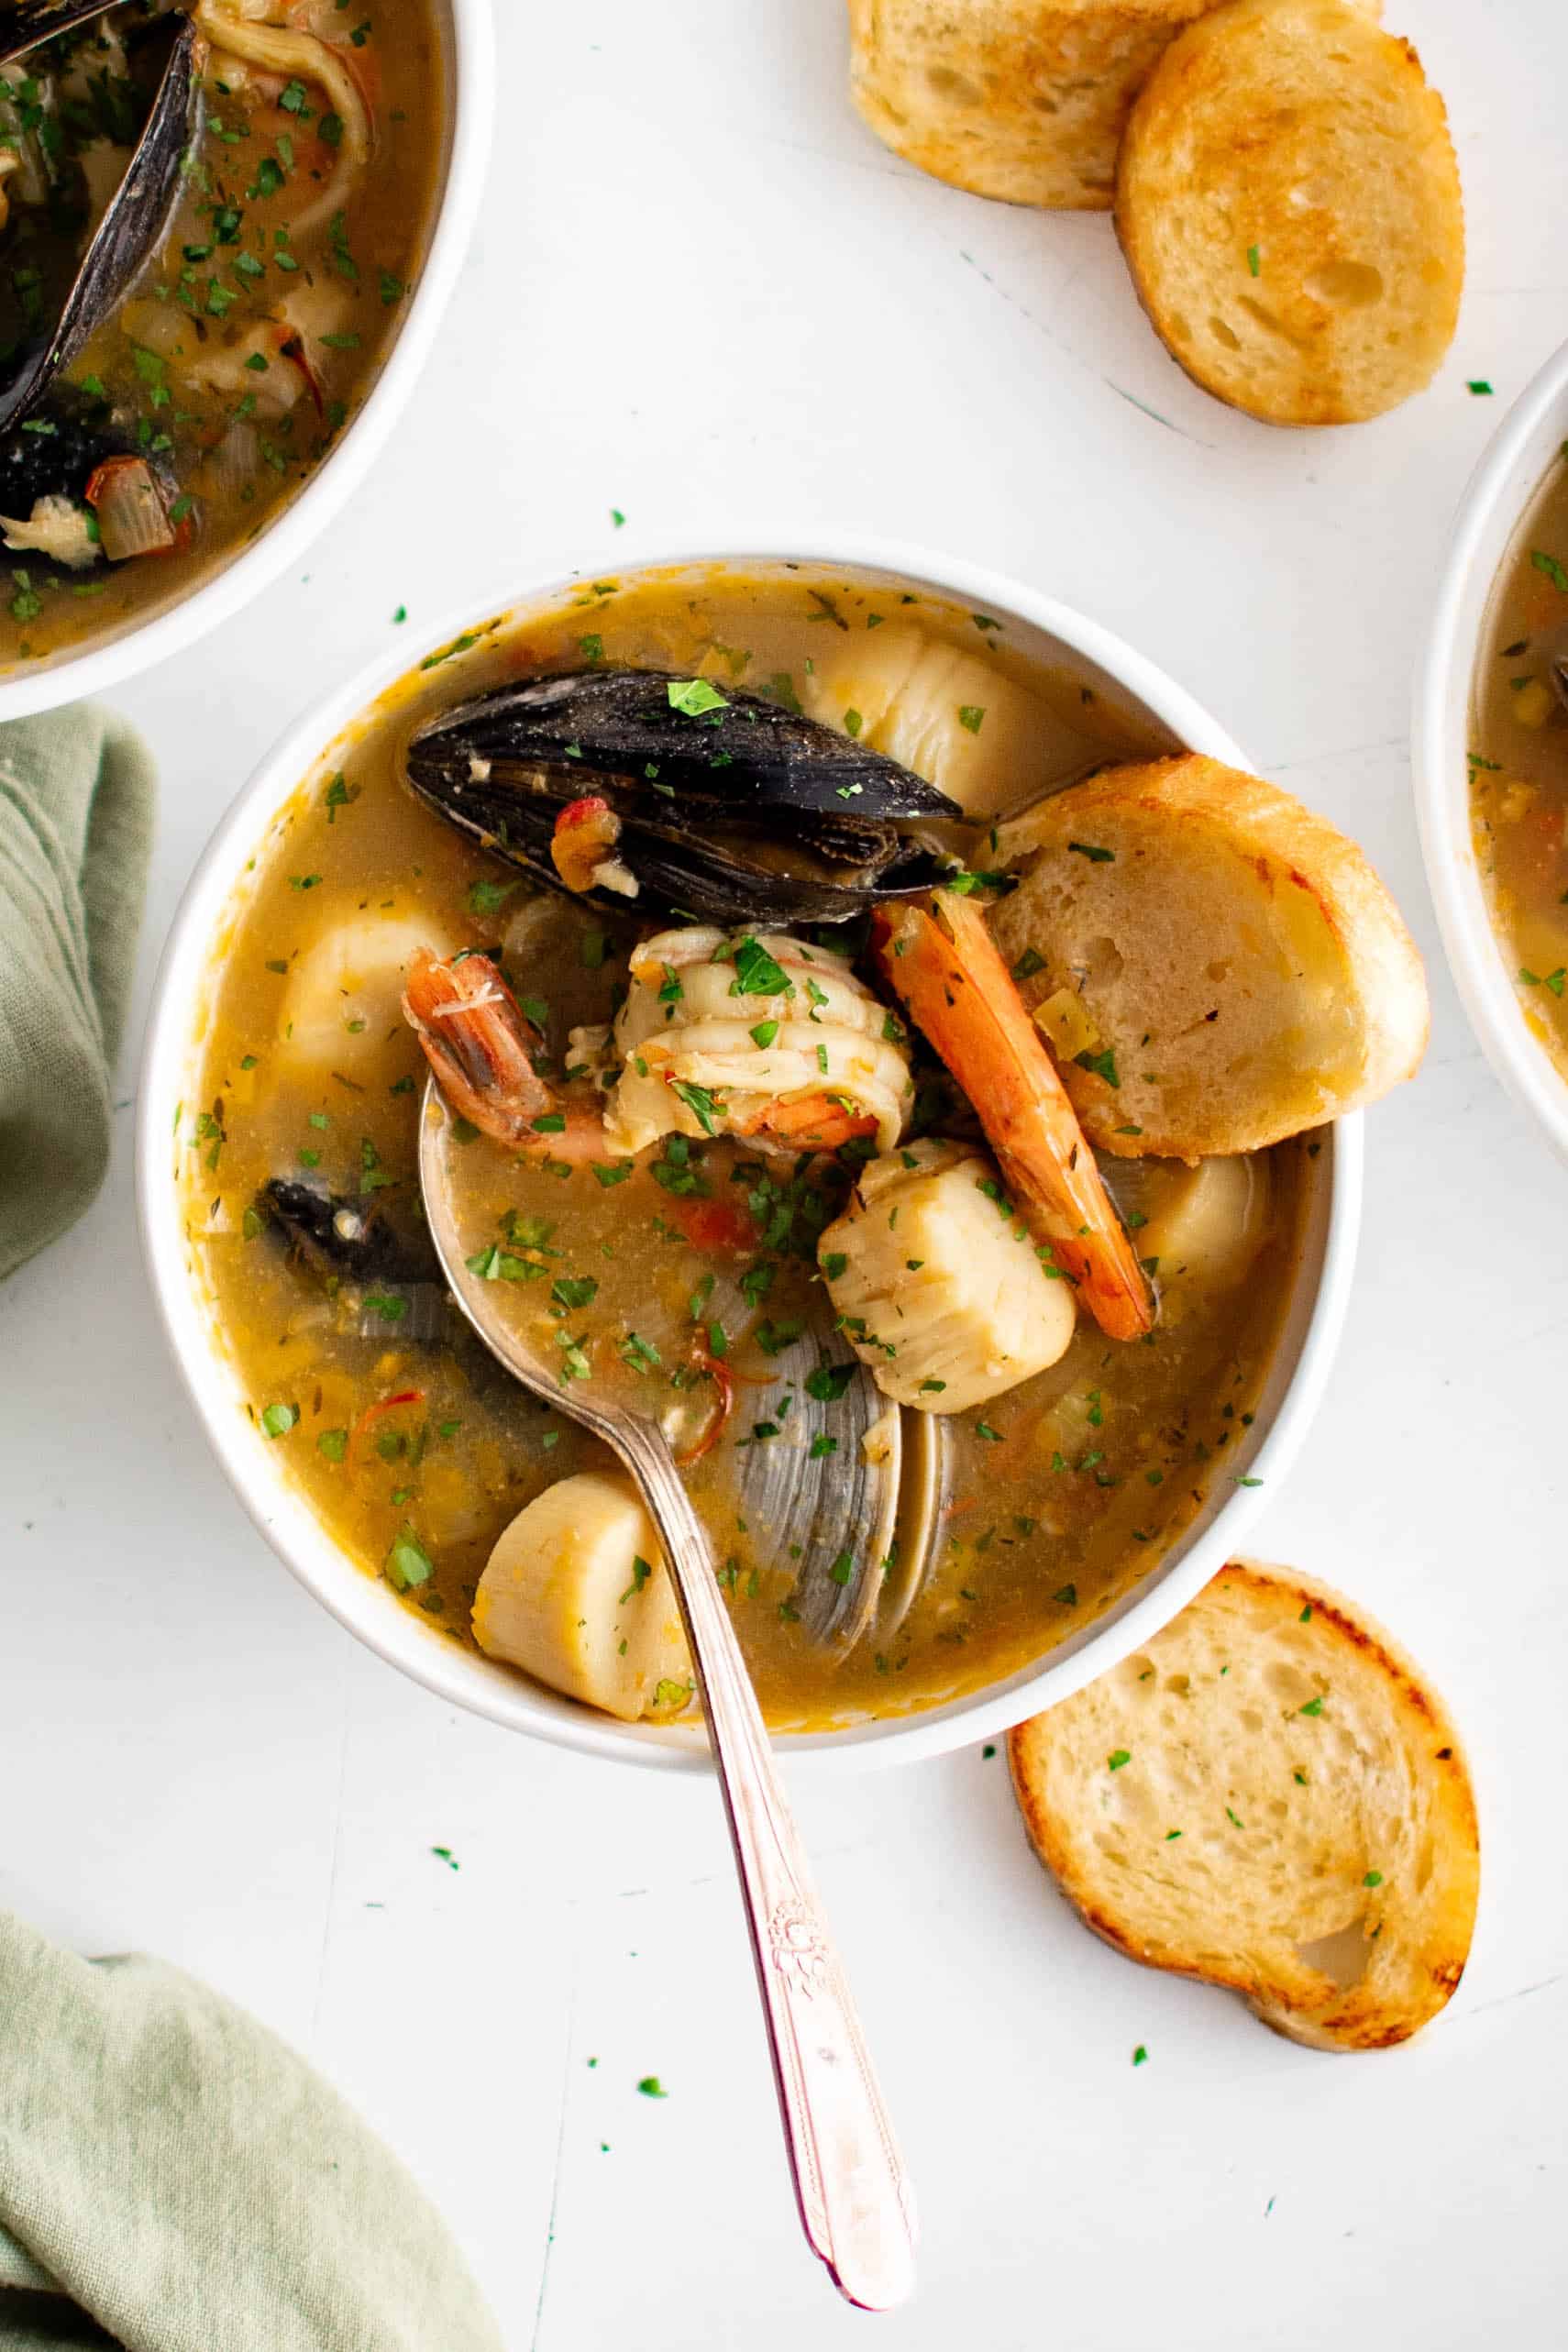 Overhead image of one white bowls filled with bouillabaisse, a French soup made with fish and fresh seafood.